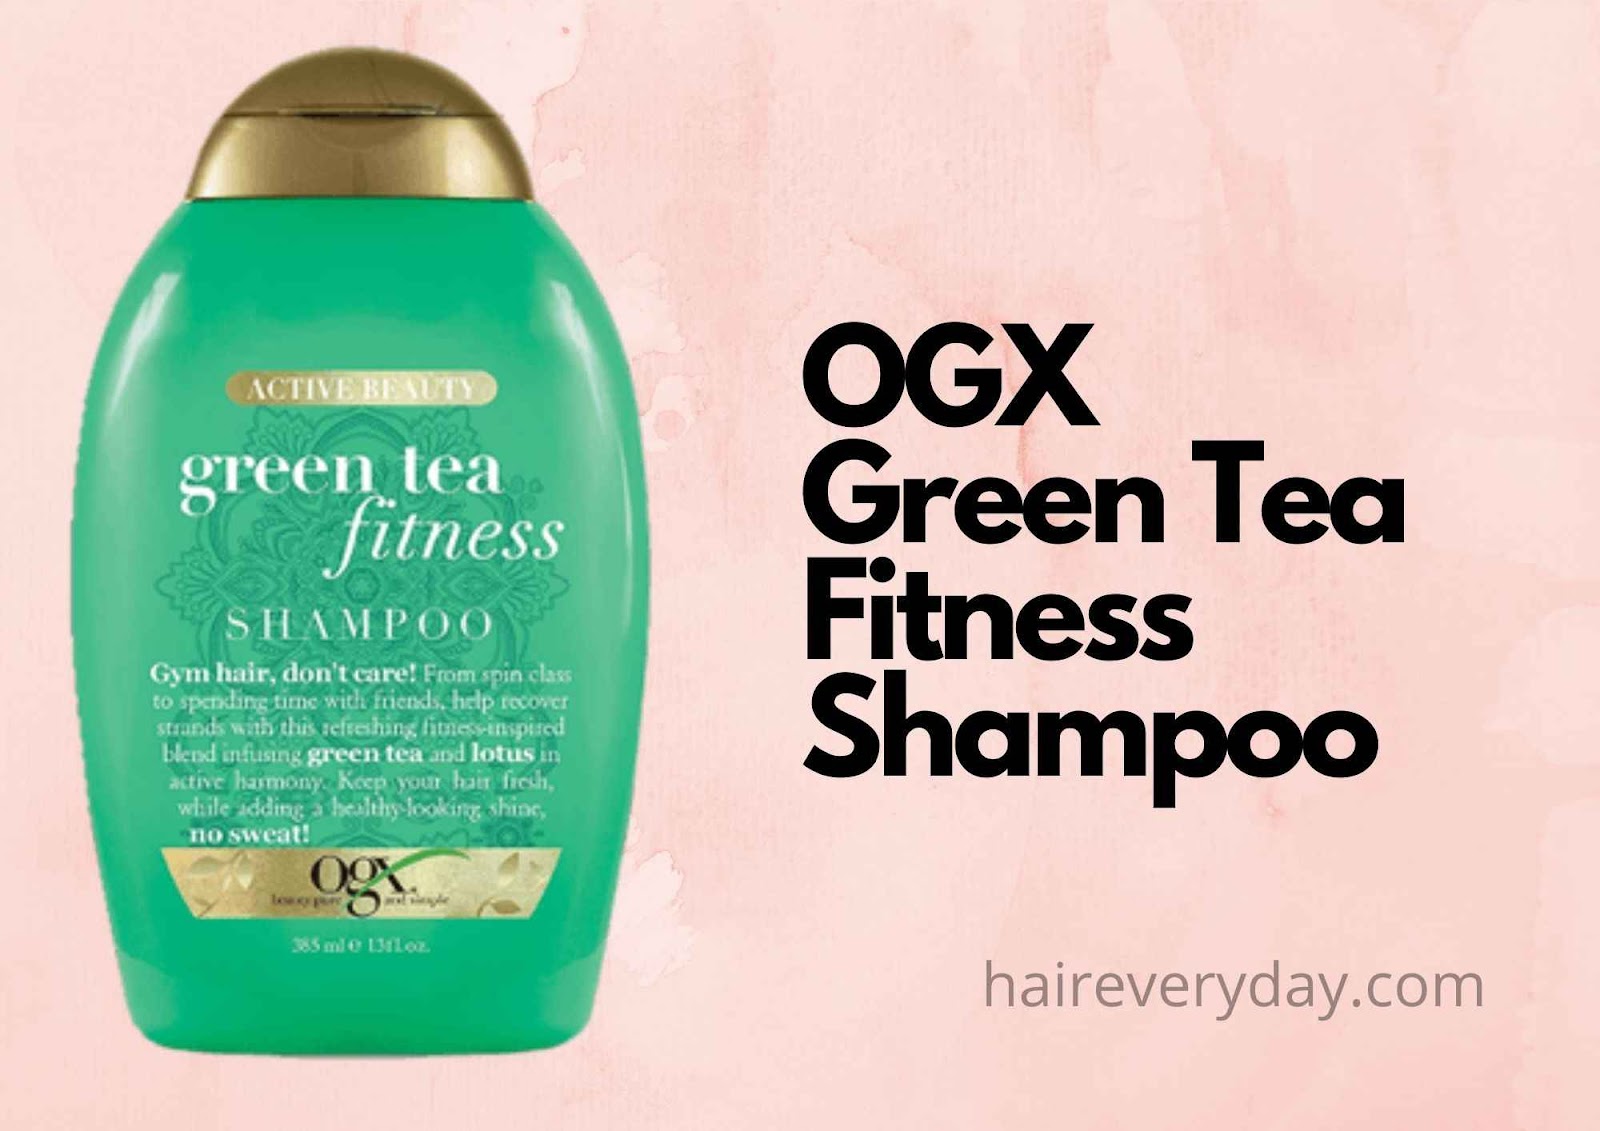 12 Best OGX Shampoo: Reviews & Guide 2023 - Hair Everyday Review